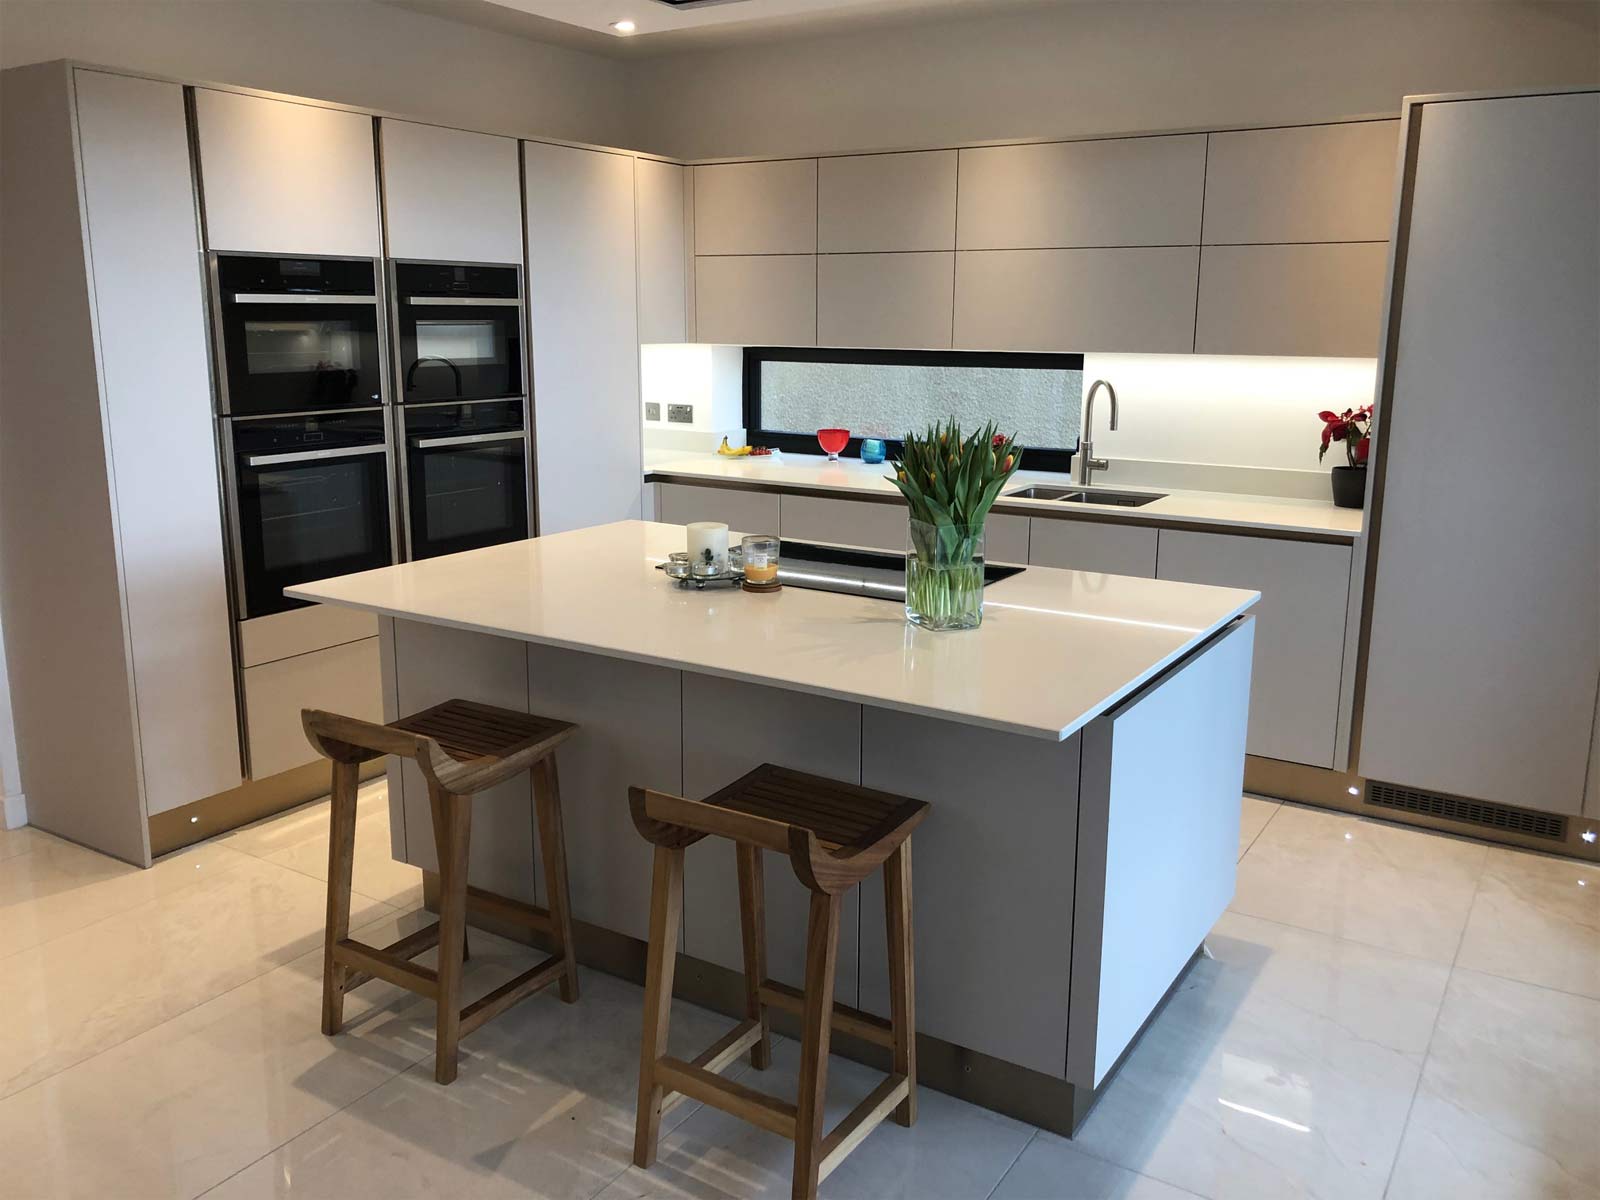 A cashmere kitchen with handleless grey cabinet doors and a kitchen island